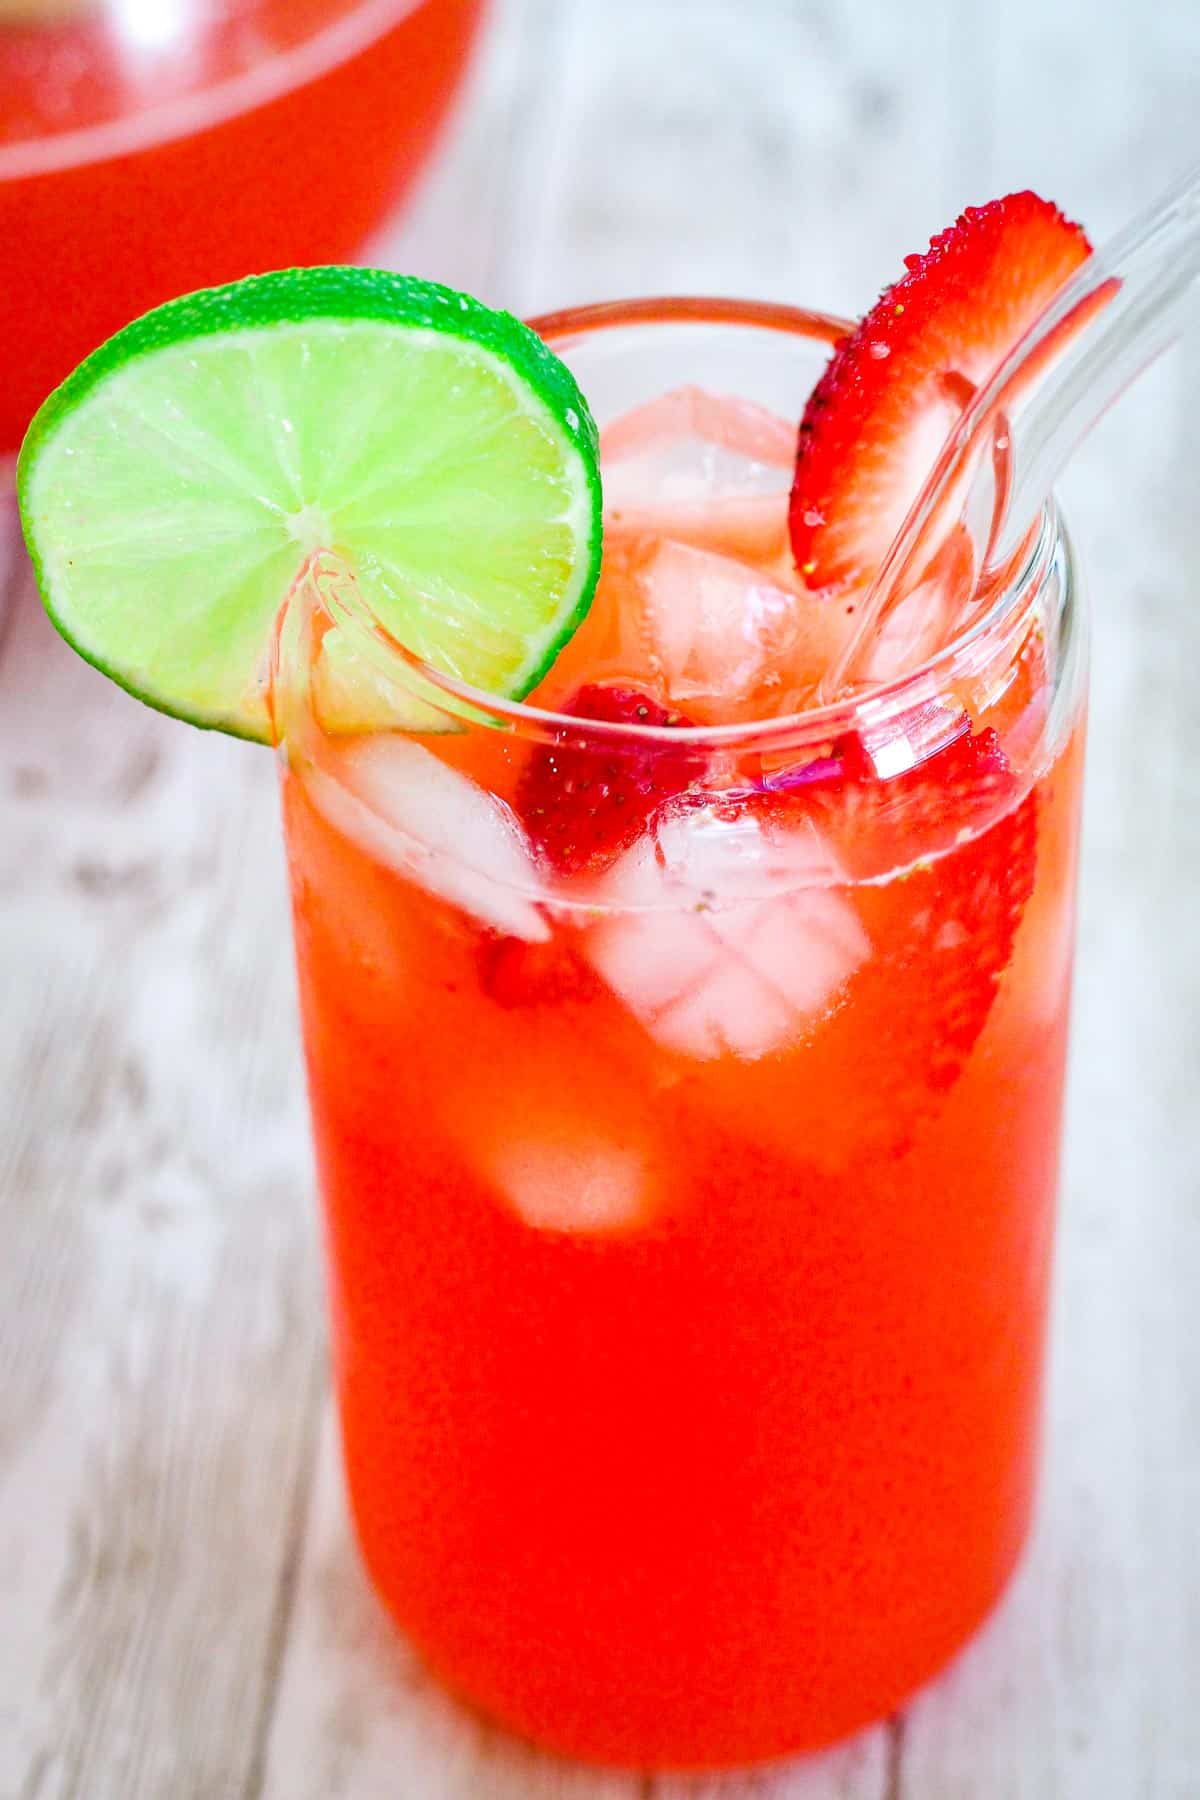 A glass with strawberry limeade drink, it's shown with a lime slice and strawberry slice as garnishes. Drink has pieces of fruit and ice in it.